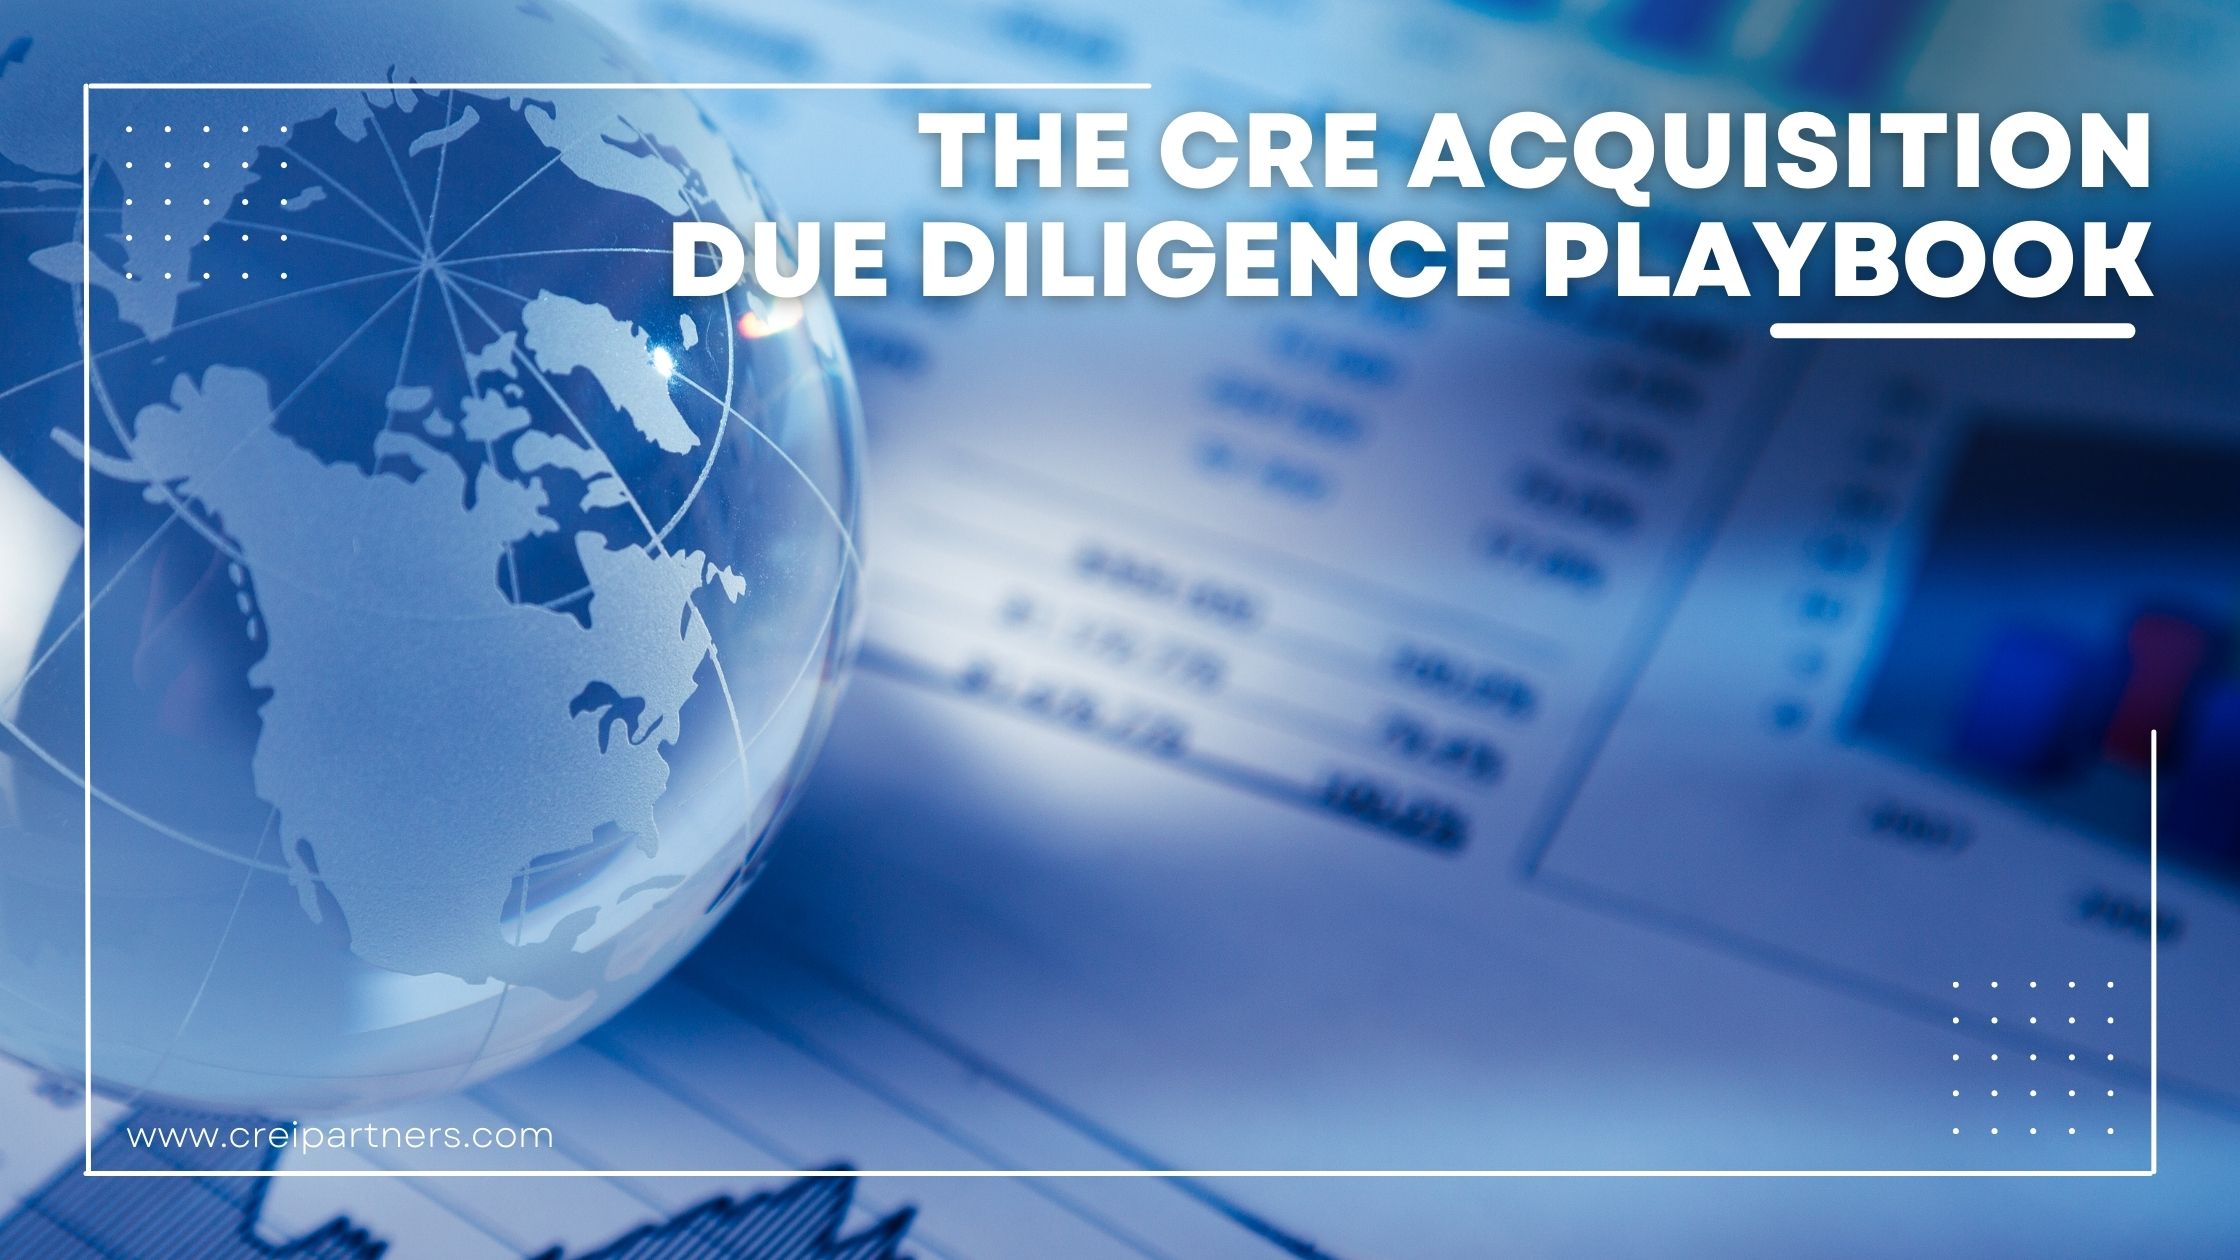 The CRE Acquisition Due Diligence Playbook